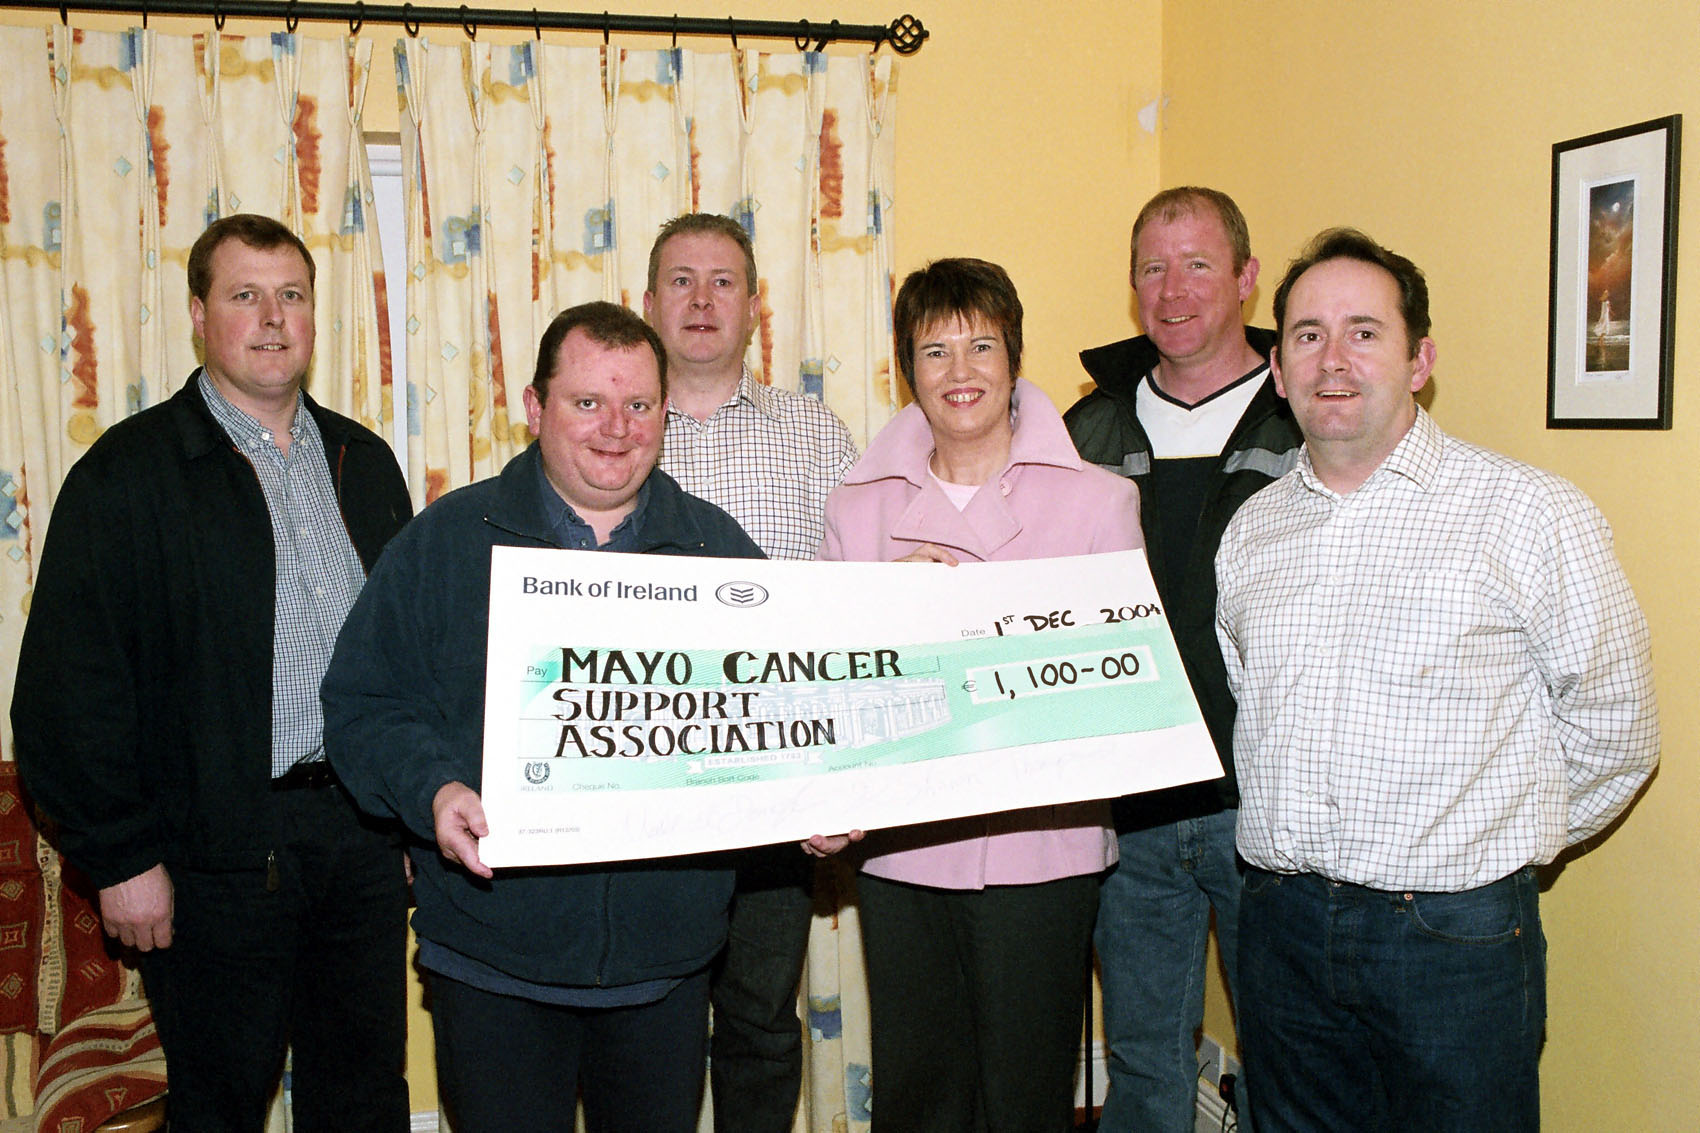 Presentation of a cheque for 1,100 to Christine Collins co-ordinator Mayo Cancer Support Association, the proceeds from the St. Geralds College Class (1978-1984) Reunion held in Breaffy House Hotel & Spa on 20th November, L-R: Kevin Durcan, John OConnor, Declan Durcan, Christine Collins, Barry Campbell and Kevin Swift: Photo  Ken Wright Photography 20004 

